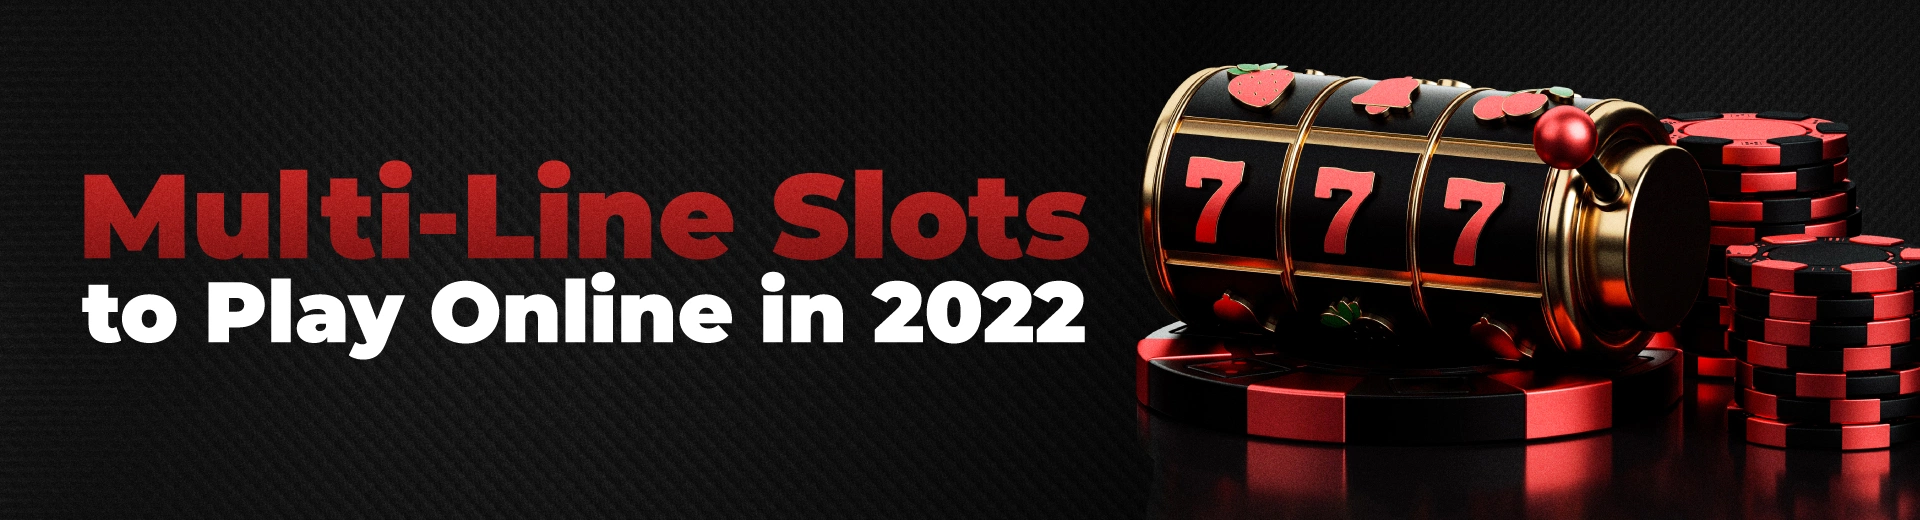 A Complete Guide to Multi-line Slots in 2022 - OKBET online slots